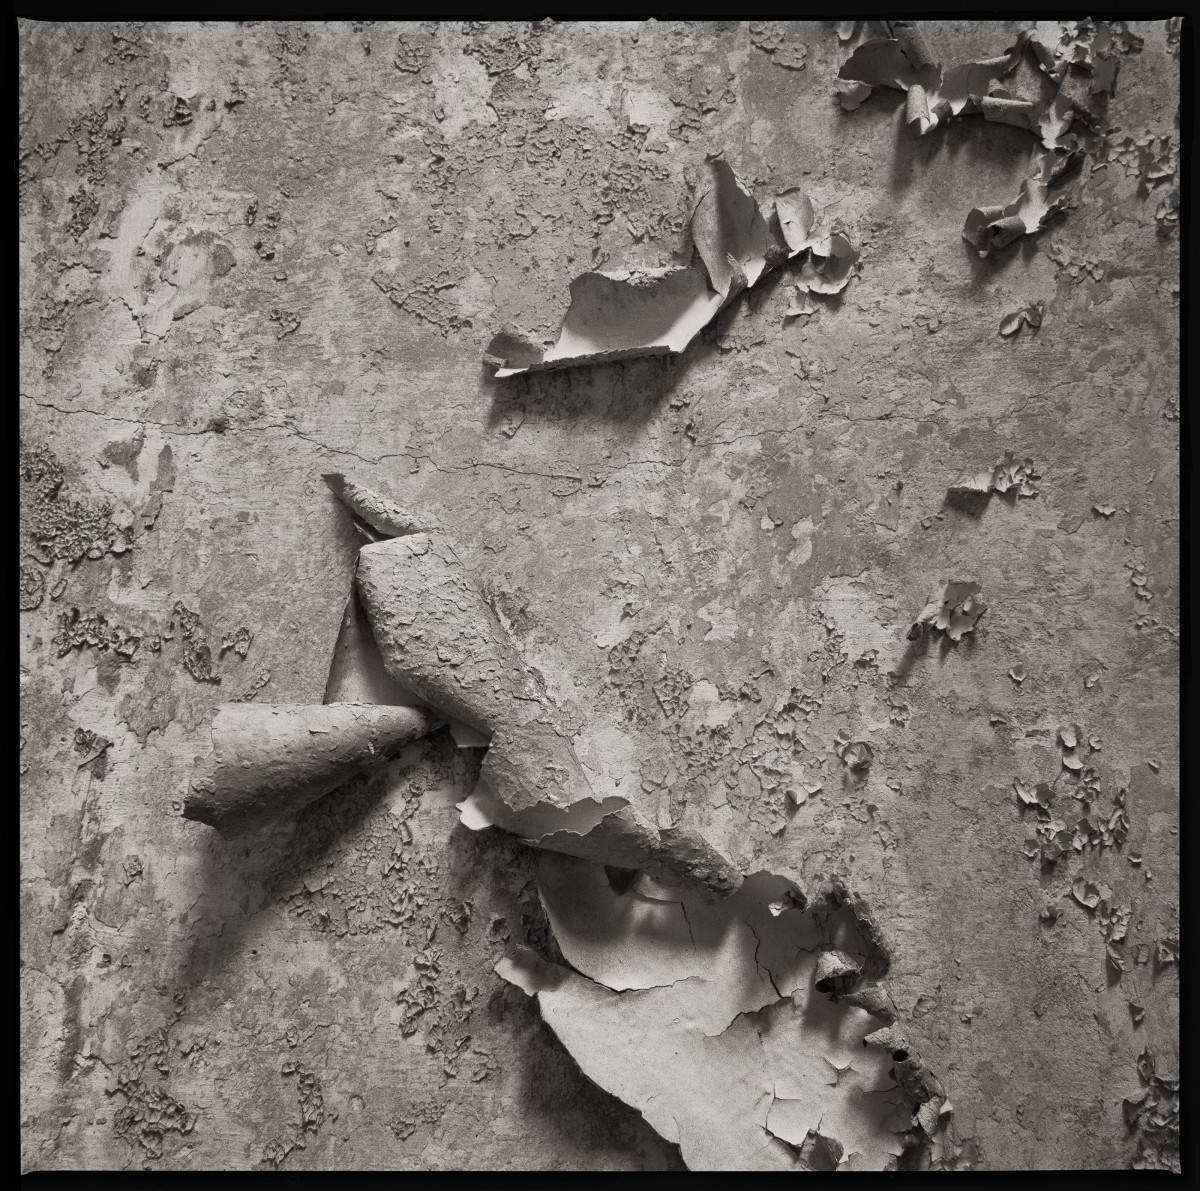 Passing of Time by Eric T. Kunsman  Image: ID: A black and white image shows paint curls and dirt and dust on the floor.